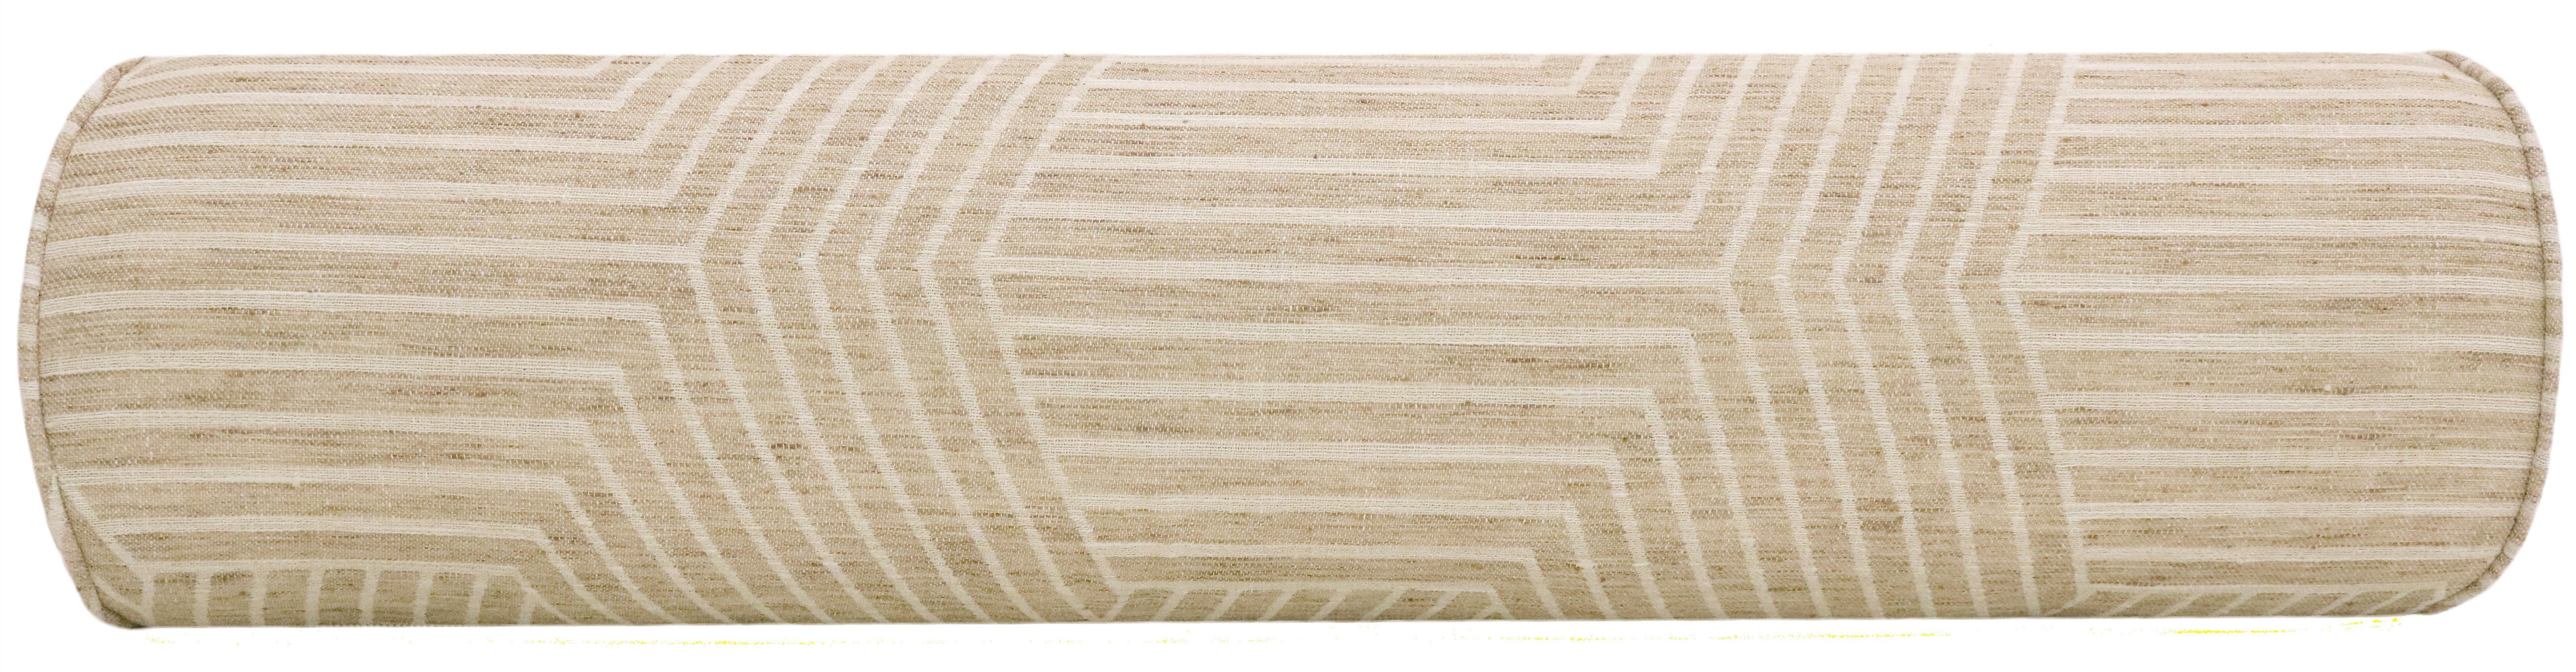 THE BOLSTER :: LABYRINTH LINEN // NATURAL - QUEEN // 9" X 36" - Image 2